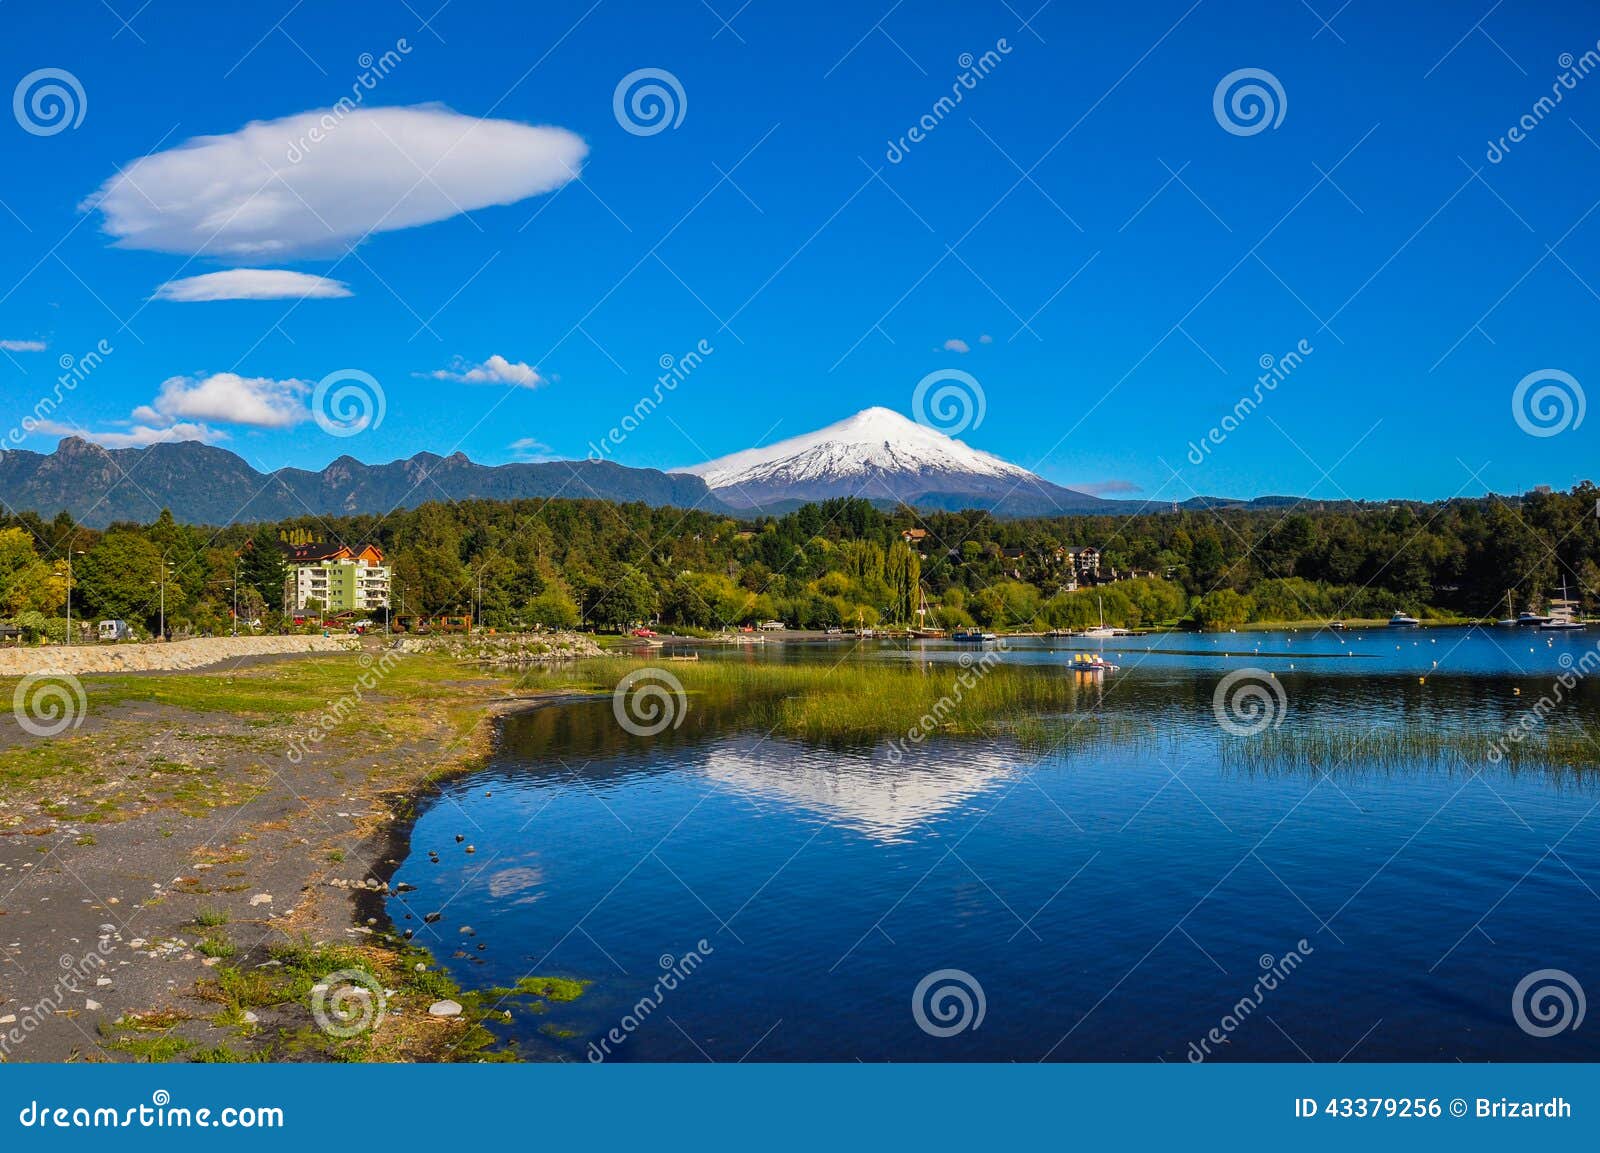 villarrica volcano, viewed from pucon, chile